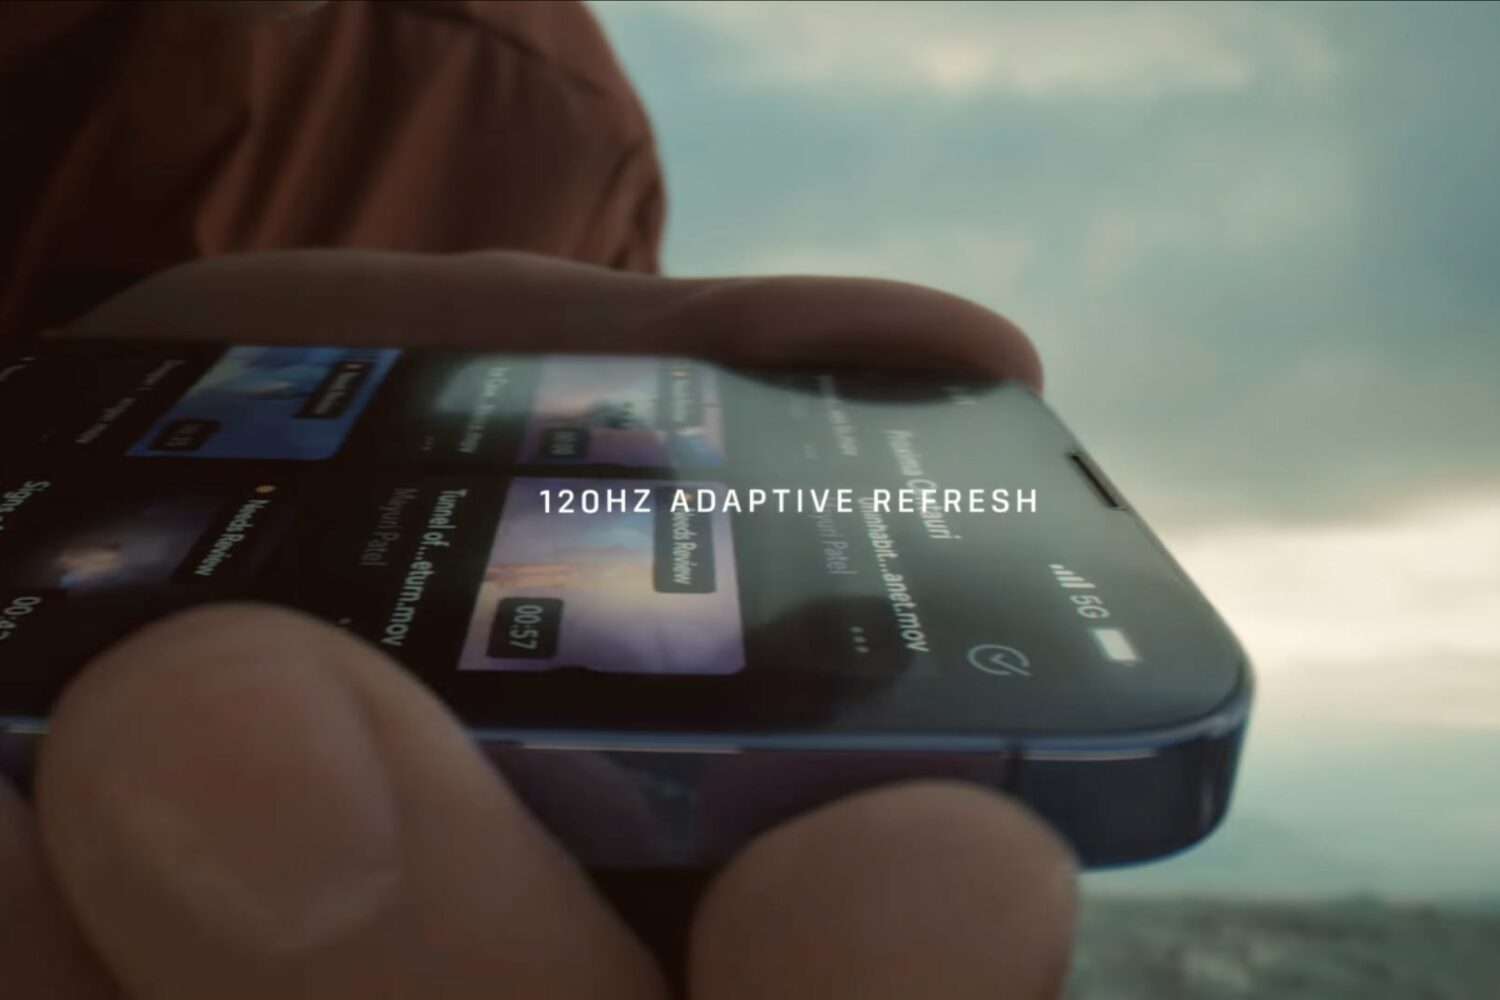 Image from Apple's YouTube video showing ProMotion technology in action, with a hand holding an iPhone 13 Pro and scrolling through a list and the title "120Hz adaptive refresh rate" overlaid on top